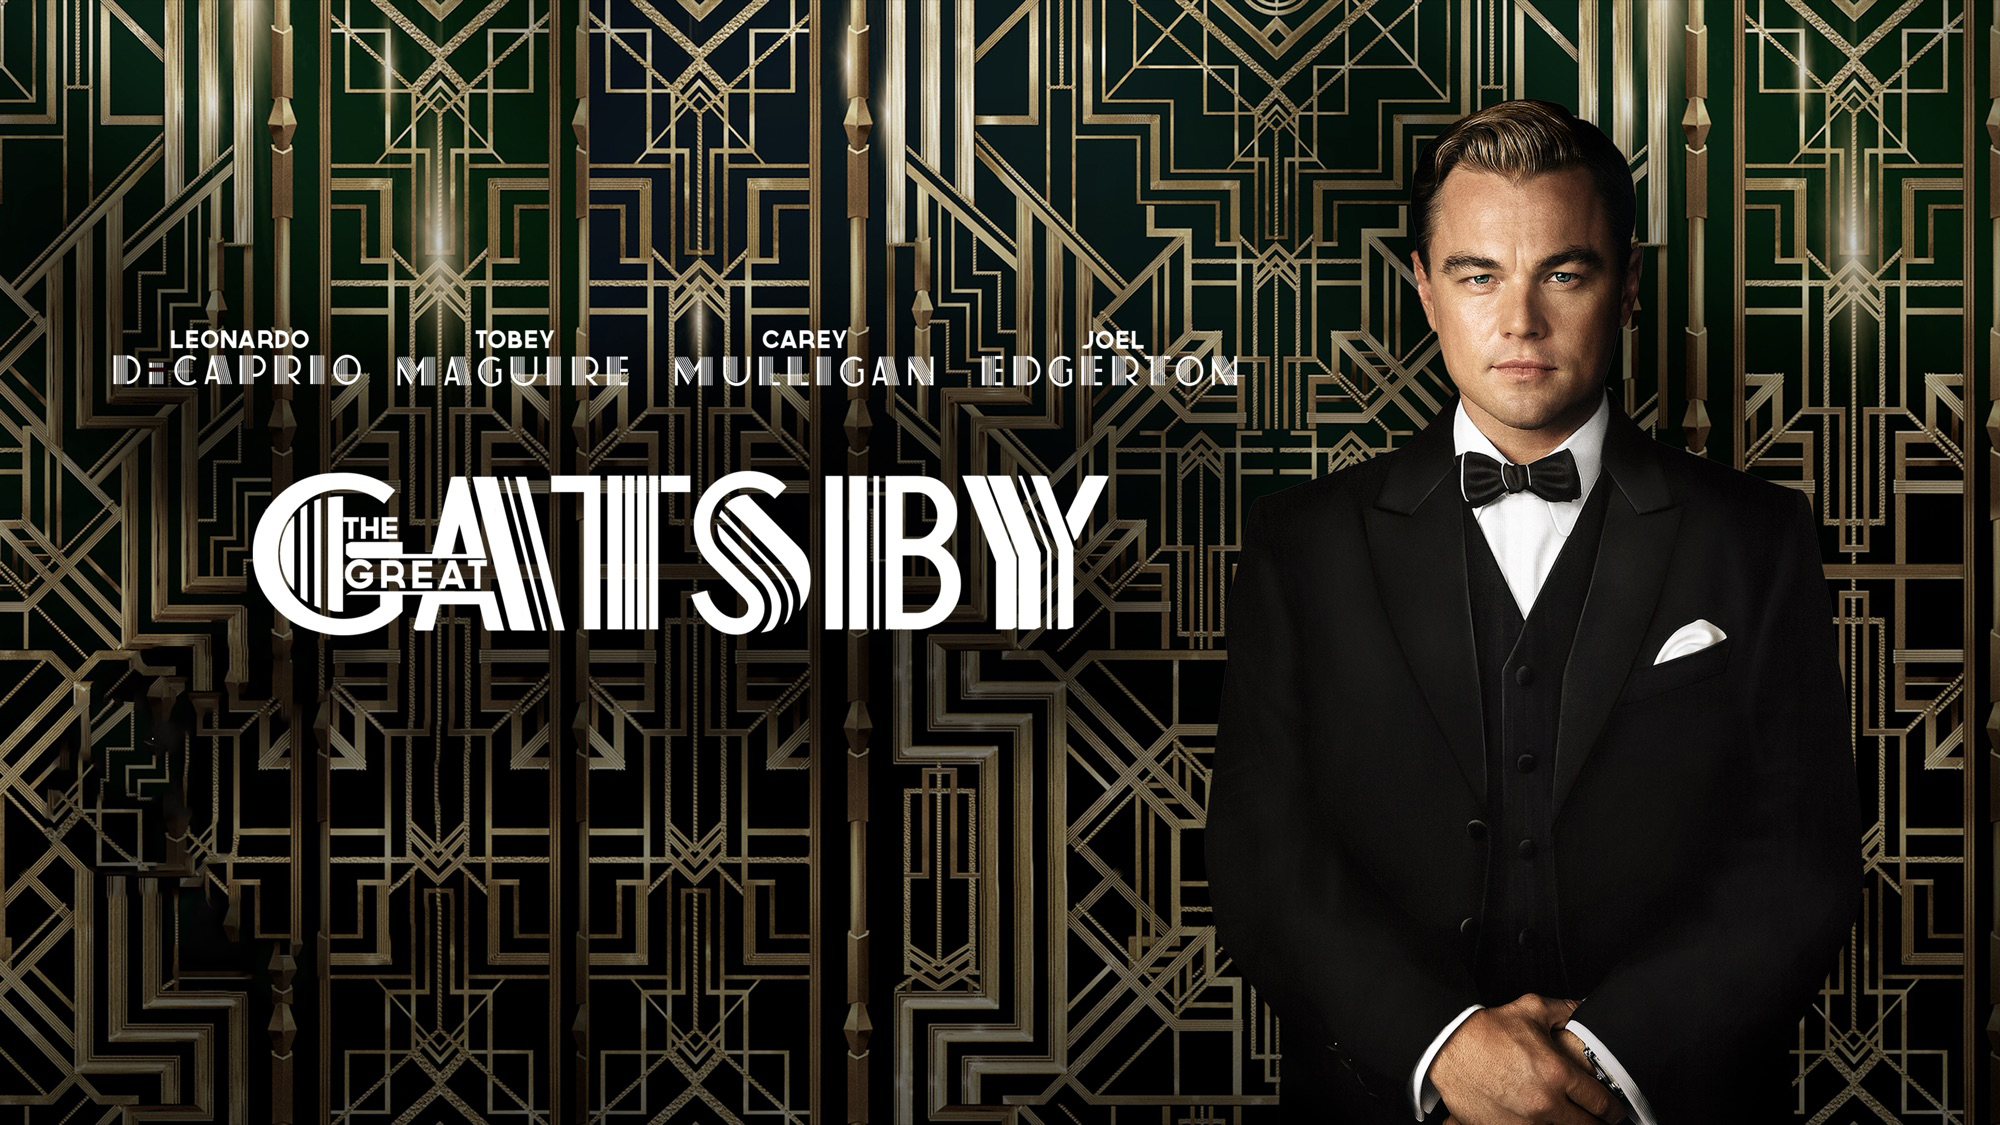 Movie The Great Gatsby HD Wallpaper Background Image. 